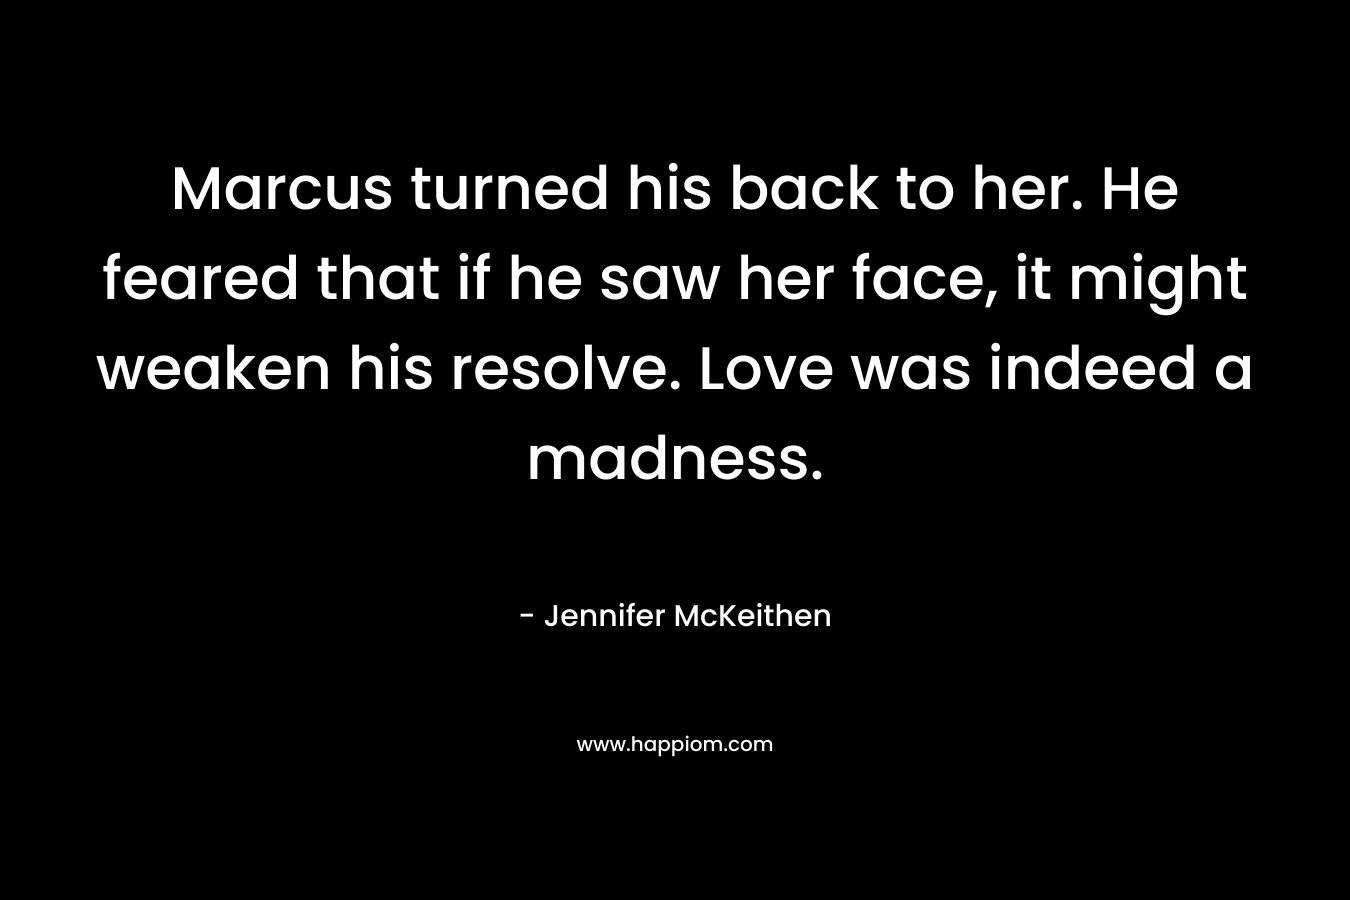 Marcus turned his back to her. He feared that if he saw her face, it might weaken his resolve. Love was indeed a madness. – Jennifer McKeithen